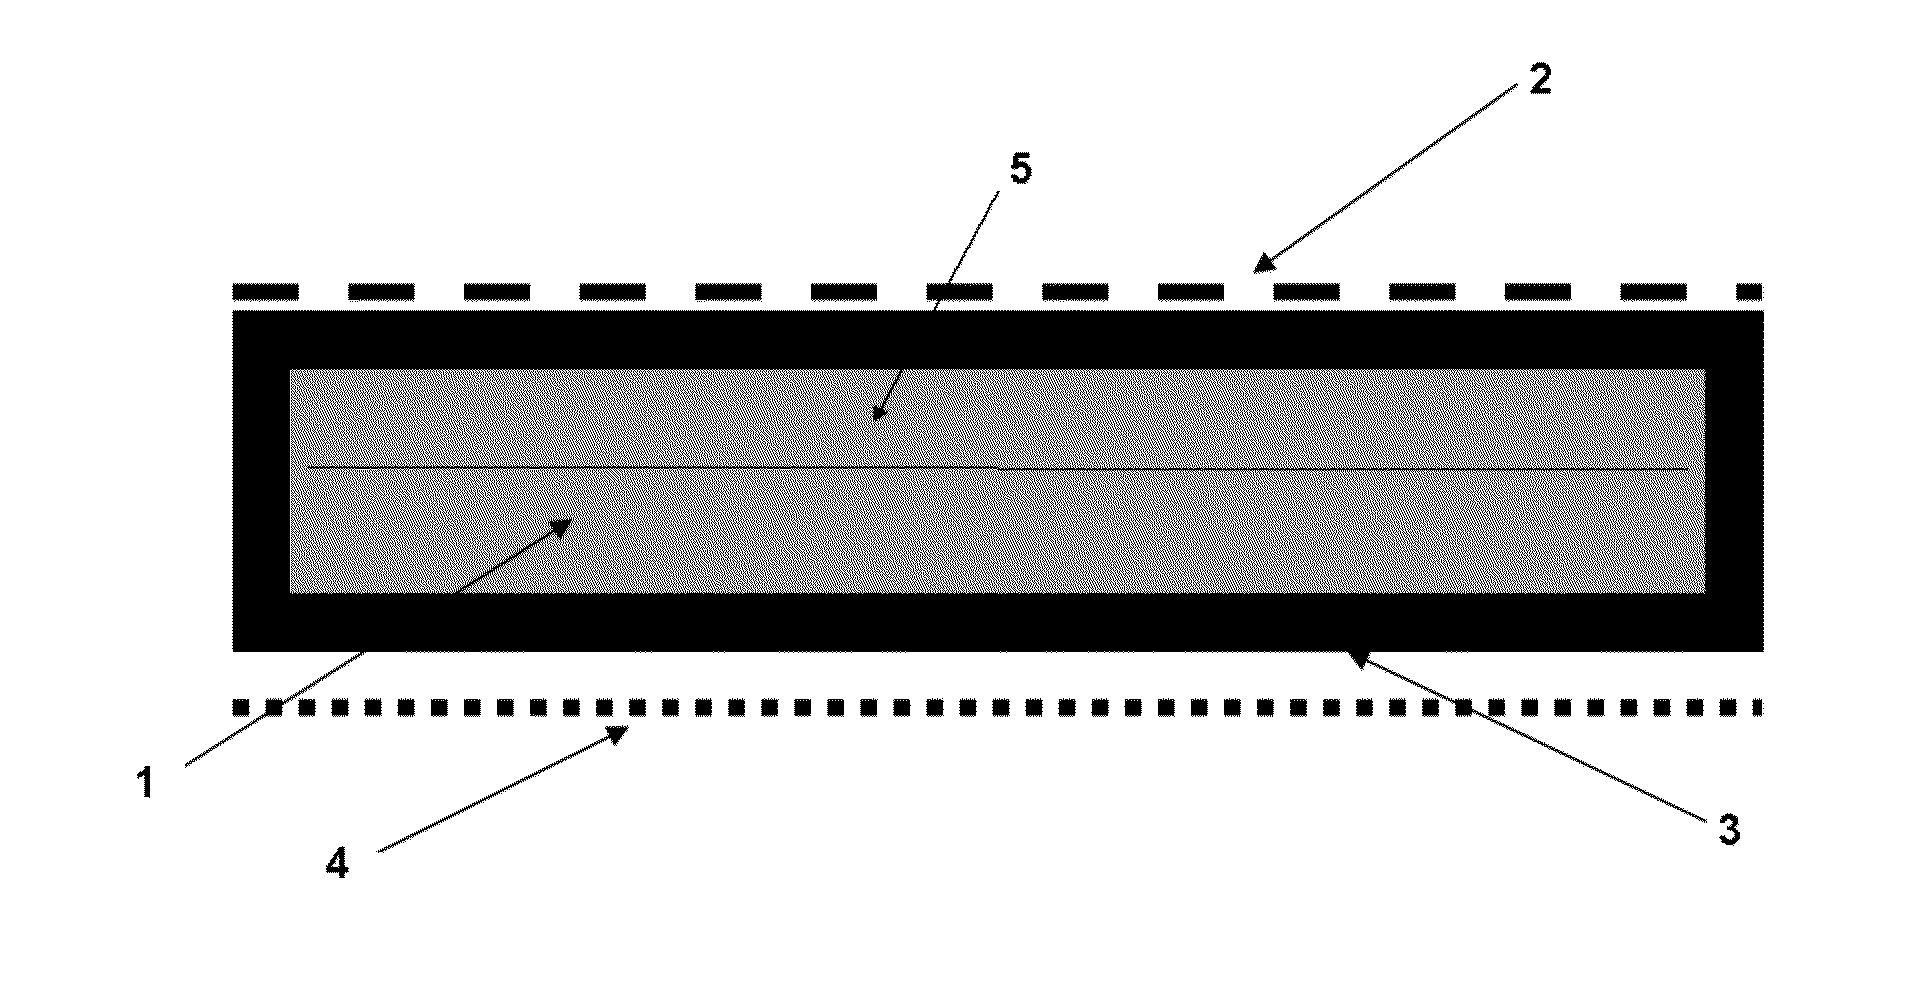 Carpet waste composite product and method for making same